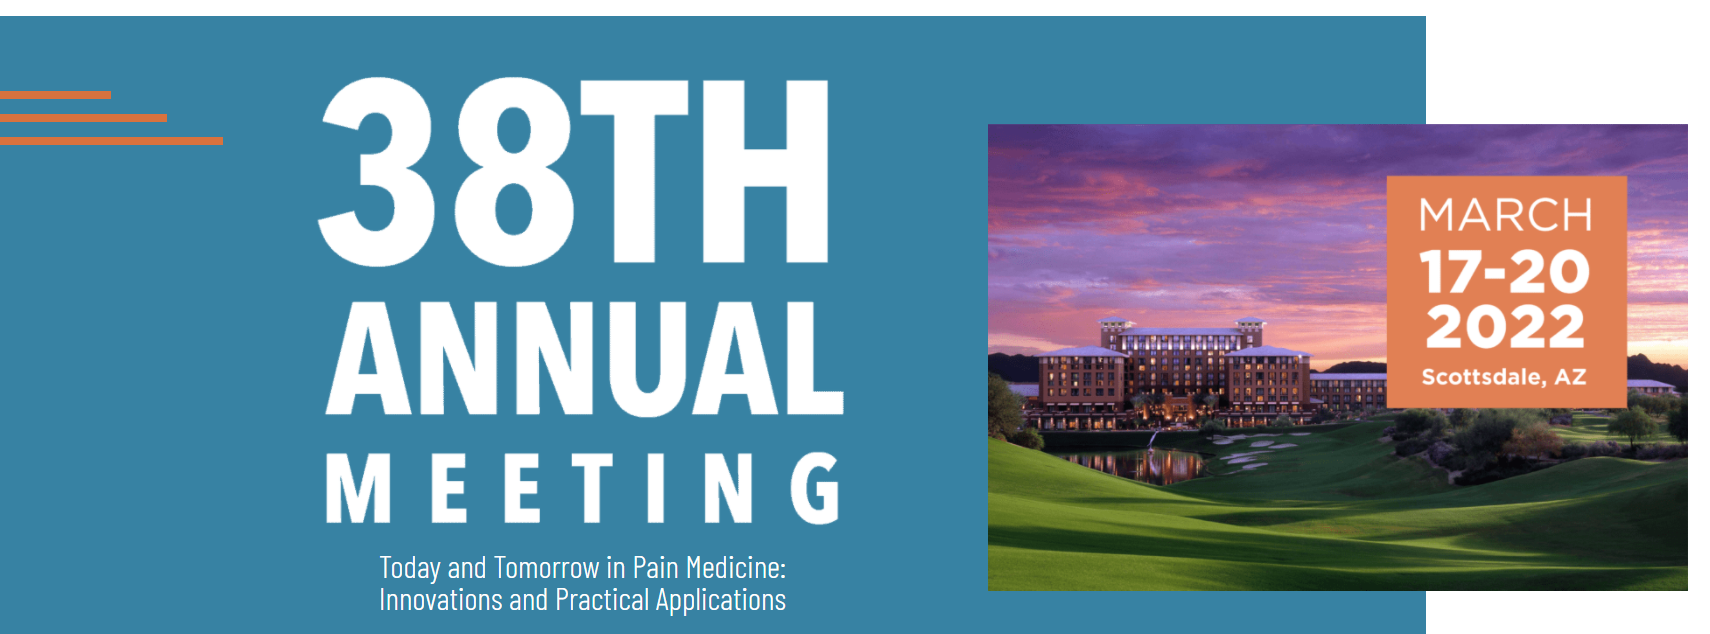 AMERICAN ACADEMY OF PAIN MEDICINE 38TH ANNUAL MEETING